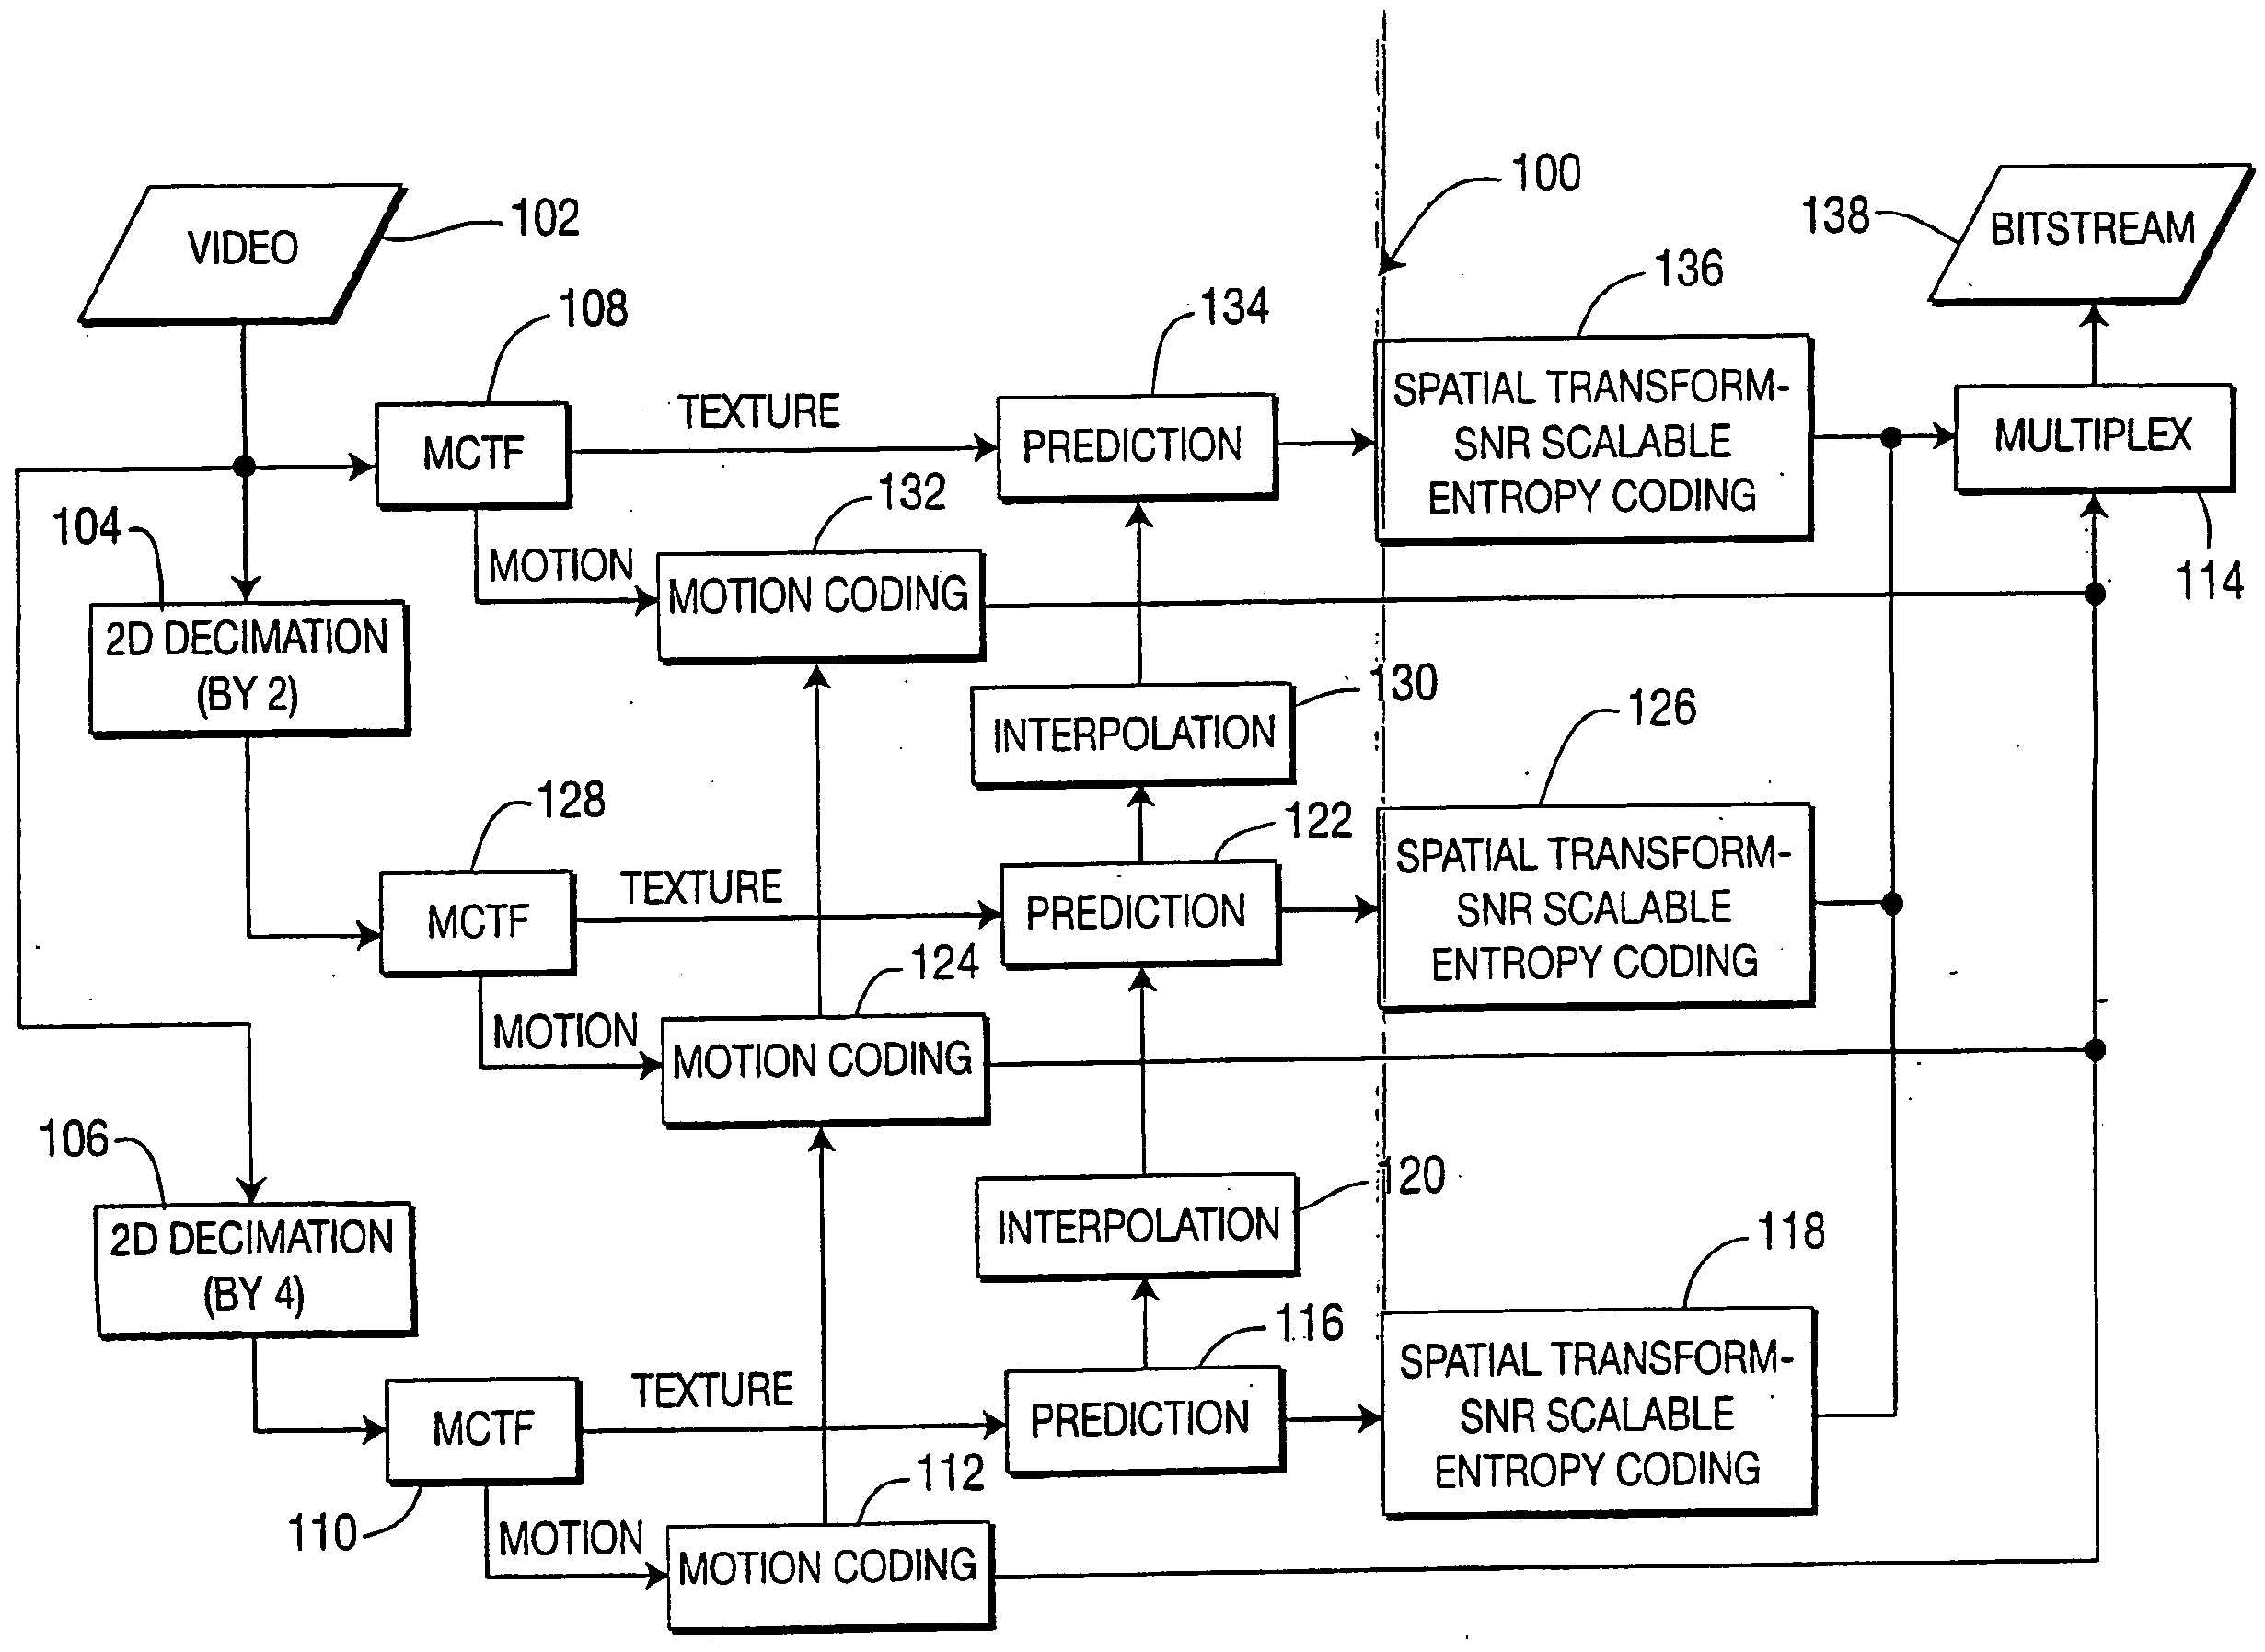 Method and Apparatus for Macroblock Adaptive Inter-Layer Intra Texture Prediction